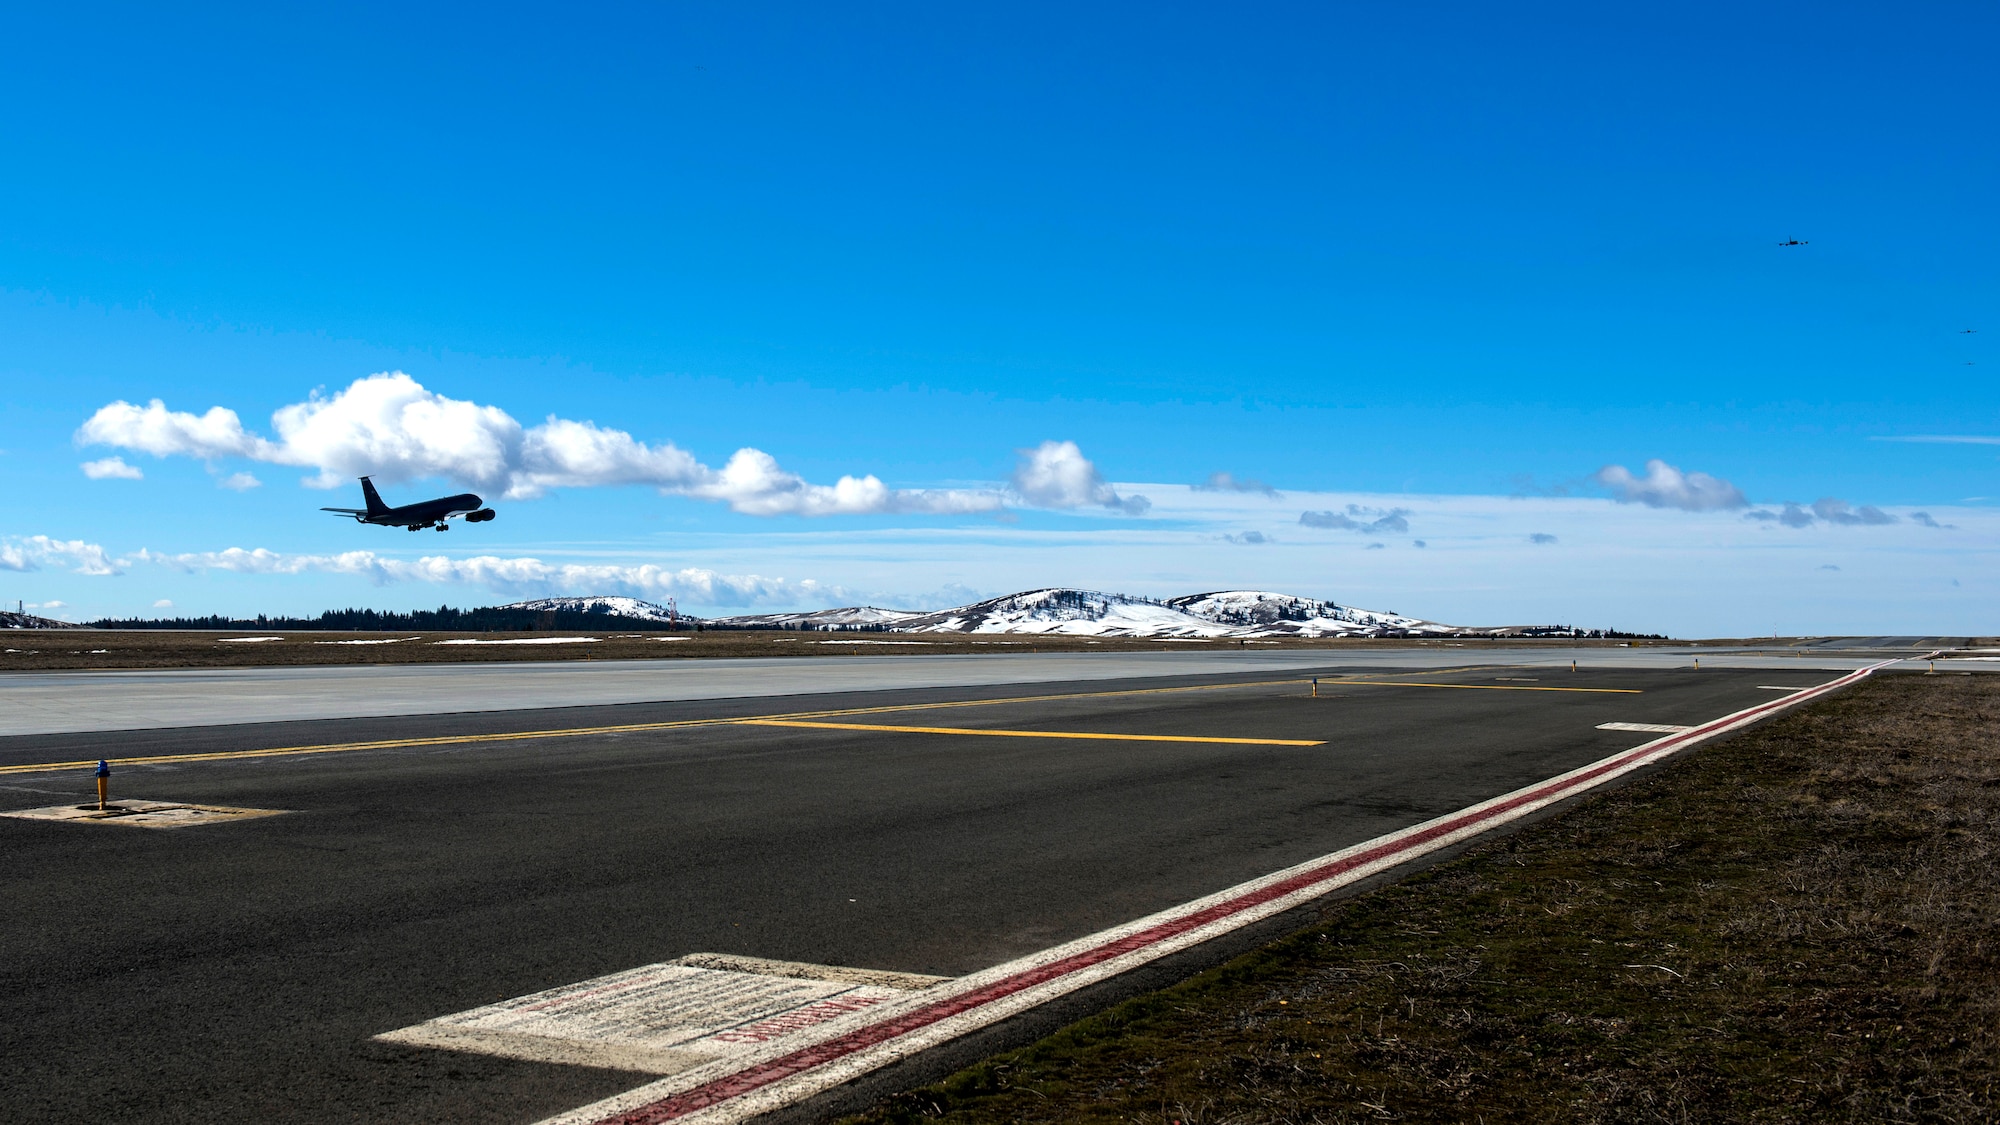 A Team Fairchild KC-135 Stratotanker takes off during exercise Titan Fury at Fairchild Air Force Base, Washington, March 9, 2018. Titan Fury is a readiness exercise used to validate and enhance Fairchild Airmen's ability to provide Rapid Global Mobility as required by U.S. Strategic Command and U.S. Transportation Command. (U.S. Air Force photo/ Airman 1st Class Whitney Laine)